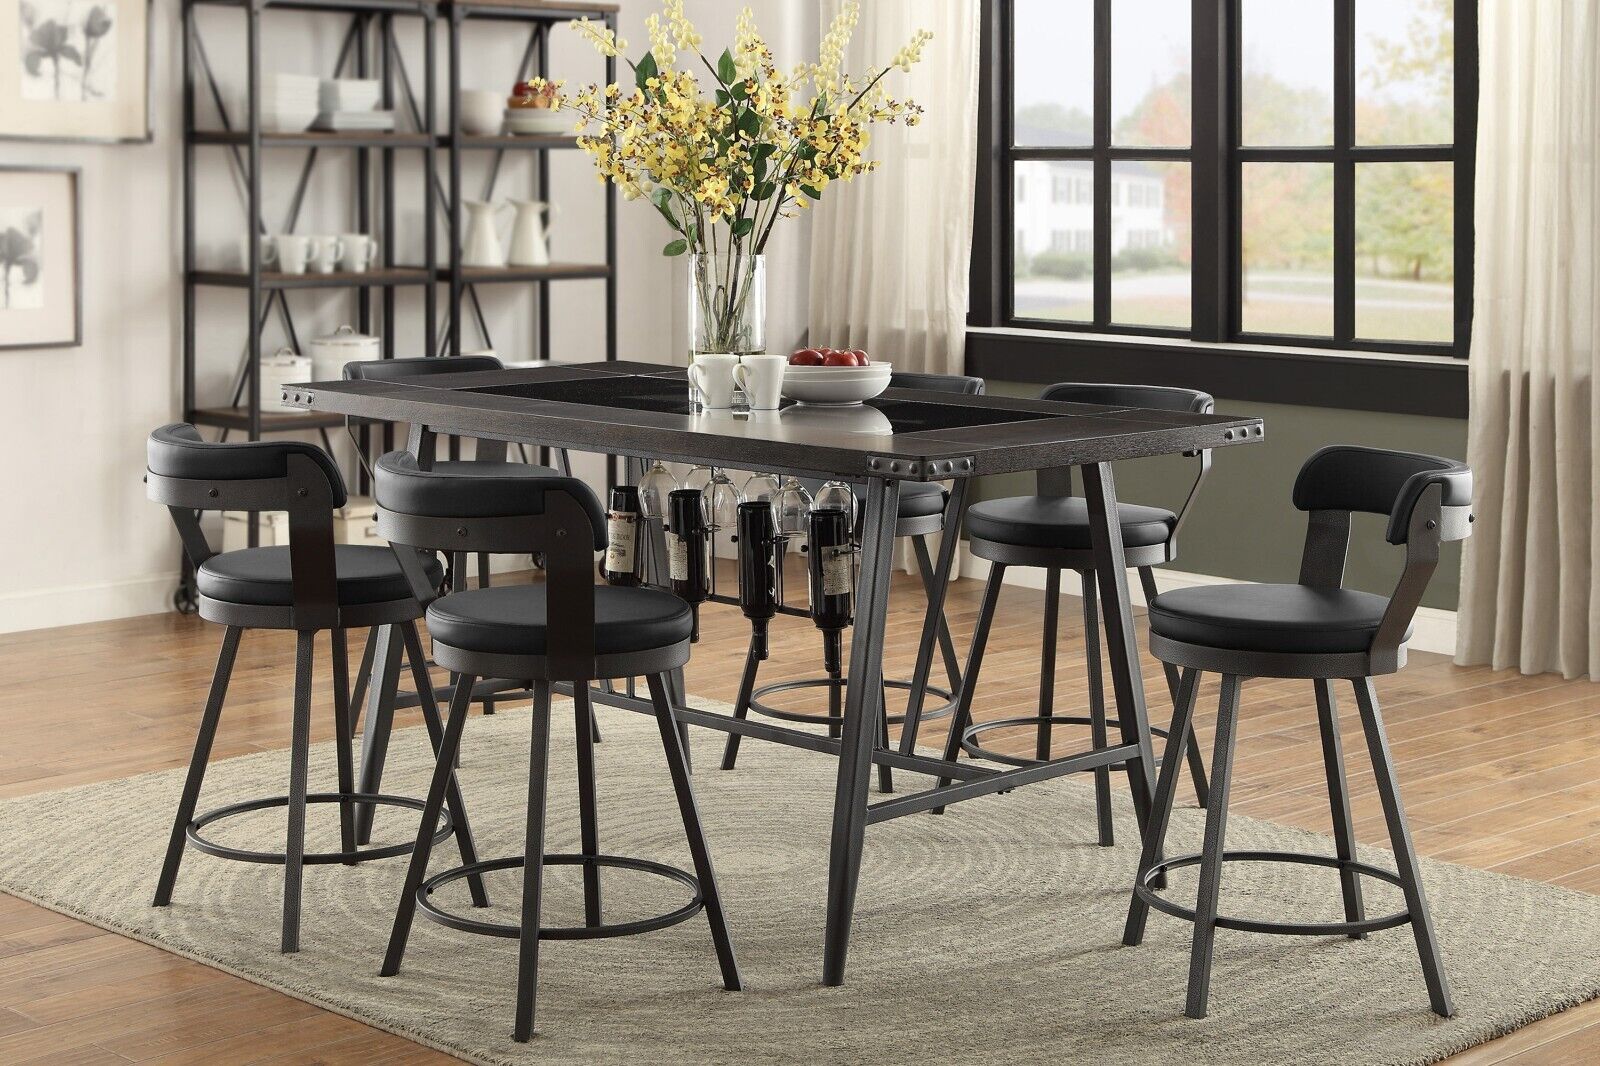 Esofastore Counter Height 7pc Set Table w/ Wine Rack Glass Insert Top 6x Swivel Counter Height Black Chairs Dining Room Furniture